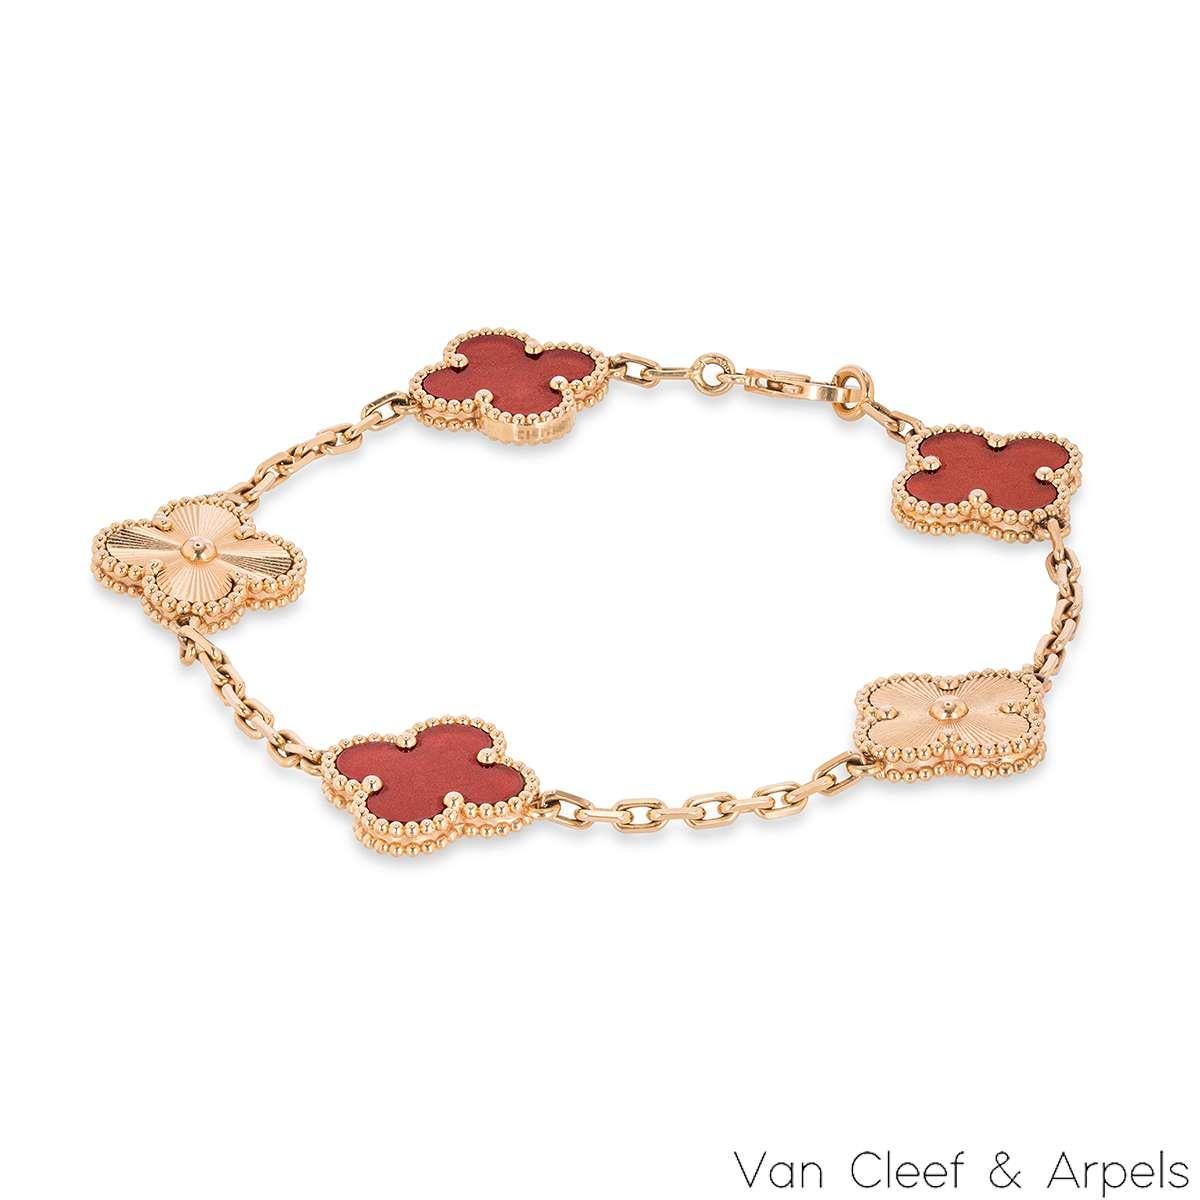 An 18k rose gold, carnelian and guilloche bracelet from the Vintage Alhambra collection by Van Cleef and Arpels. The bracelet consists of 5 alternating iconic clover motifs, 3 are set with carnelian inlays and the other 2 feature guilloche inlays.